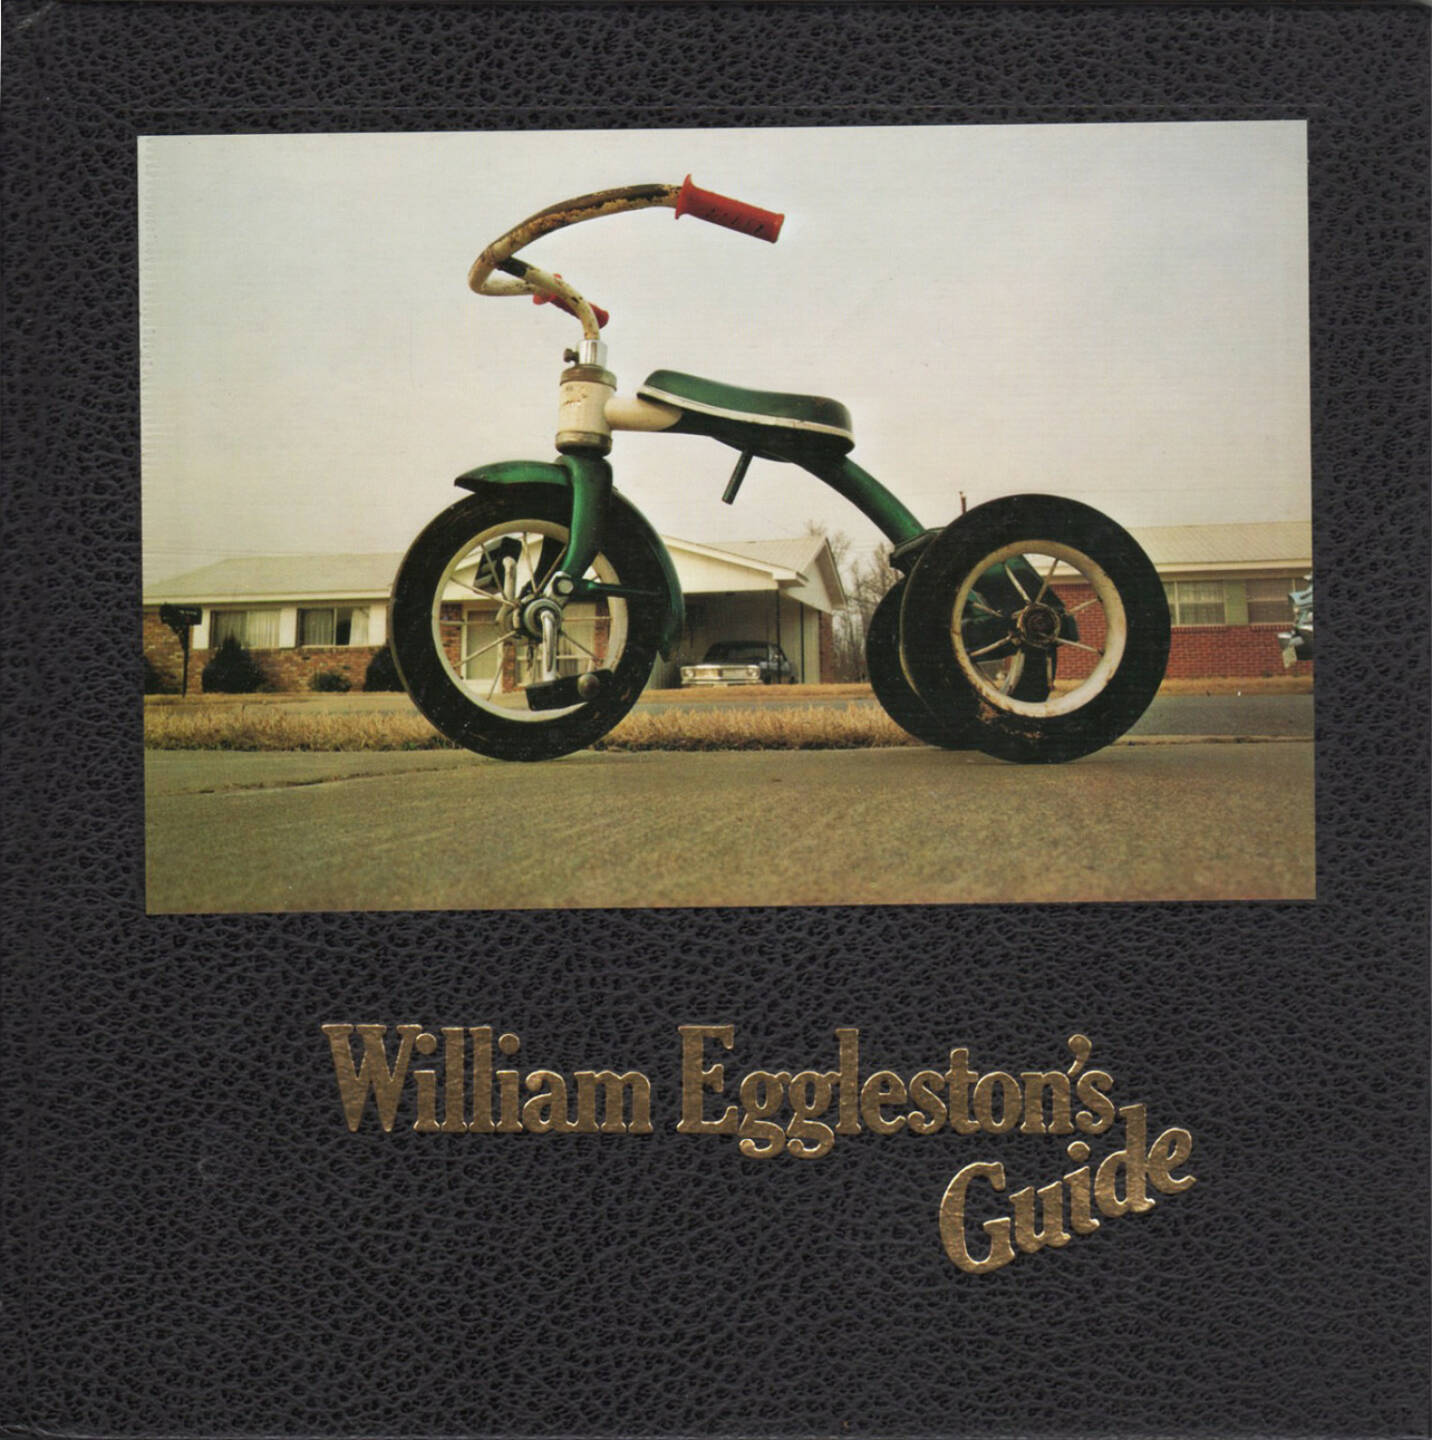 William Eggleston - William Eggleston's Guide, The Museum of Modern Art & The MIT Press 1976, Cover - http://josefchladek.com/book/william_eggleston_-_william_egglestons_guide